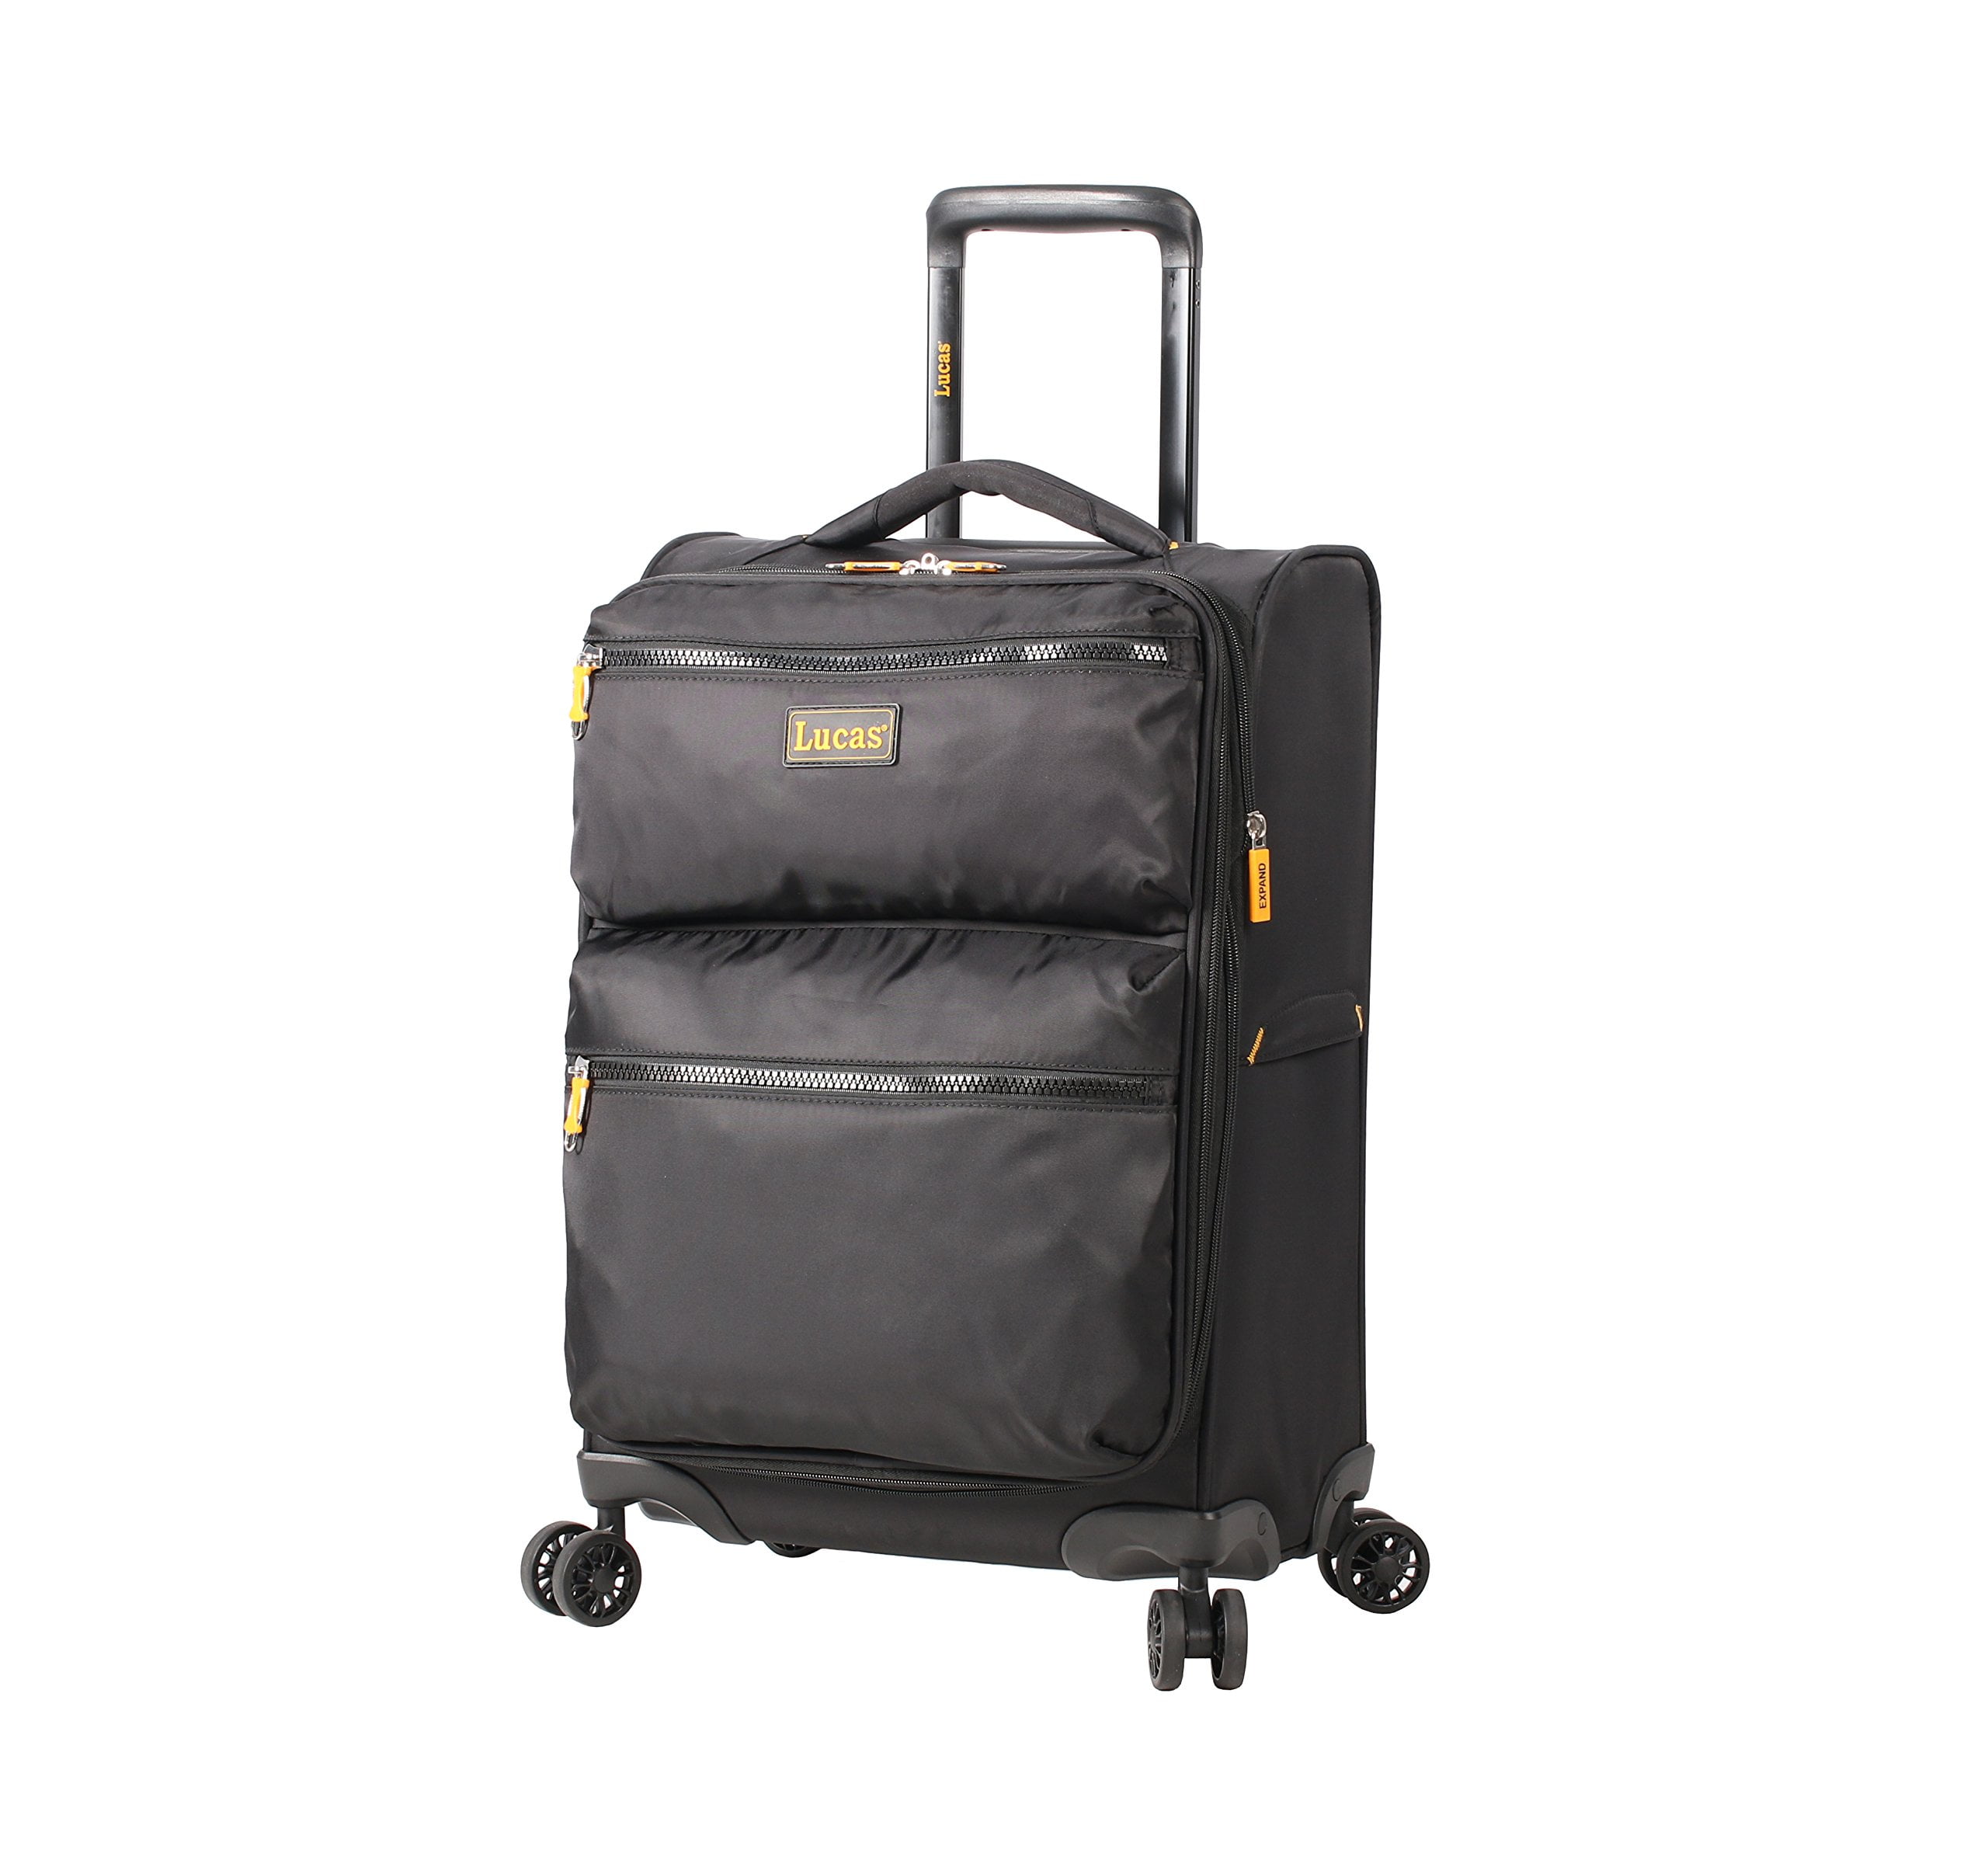 Lucas Ultra Lightweight Carry On - Softside 20 Inch Expandable Luggage -  Small Rolling Bag Fits Most Airline Compartments - Durable 8-Spinner Wheels